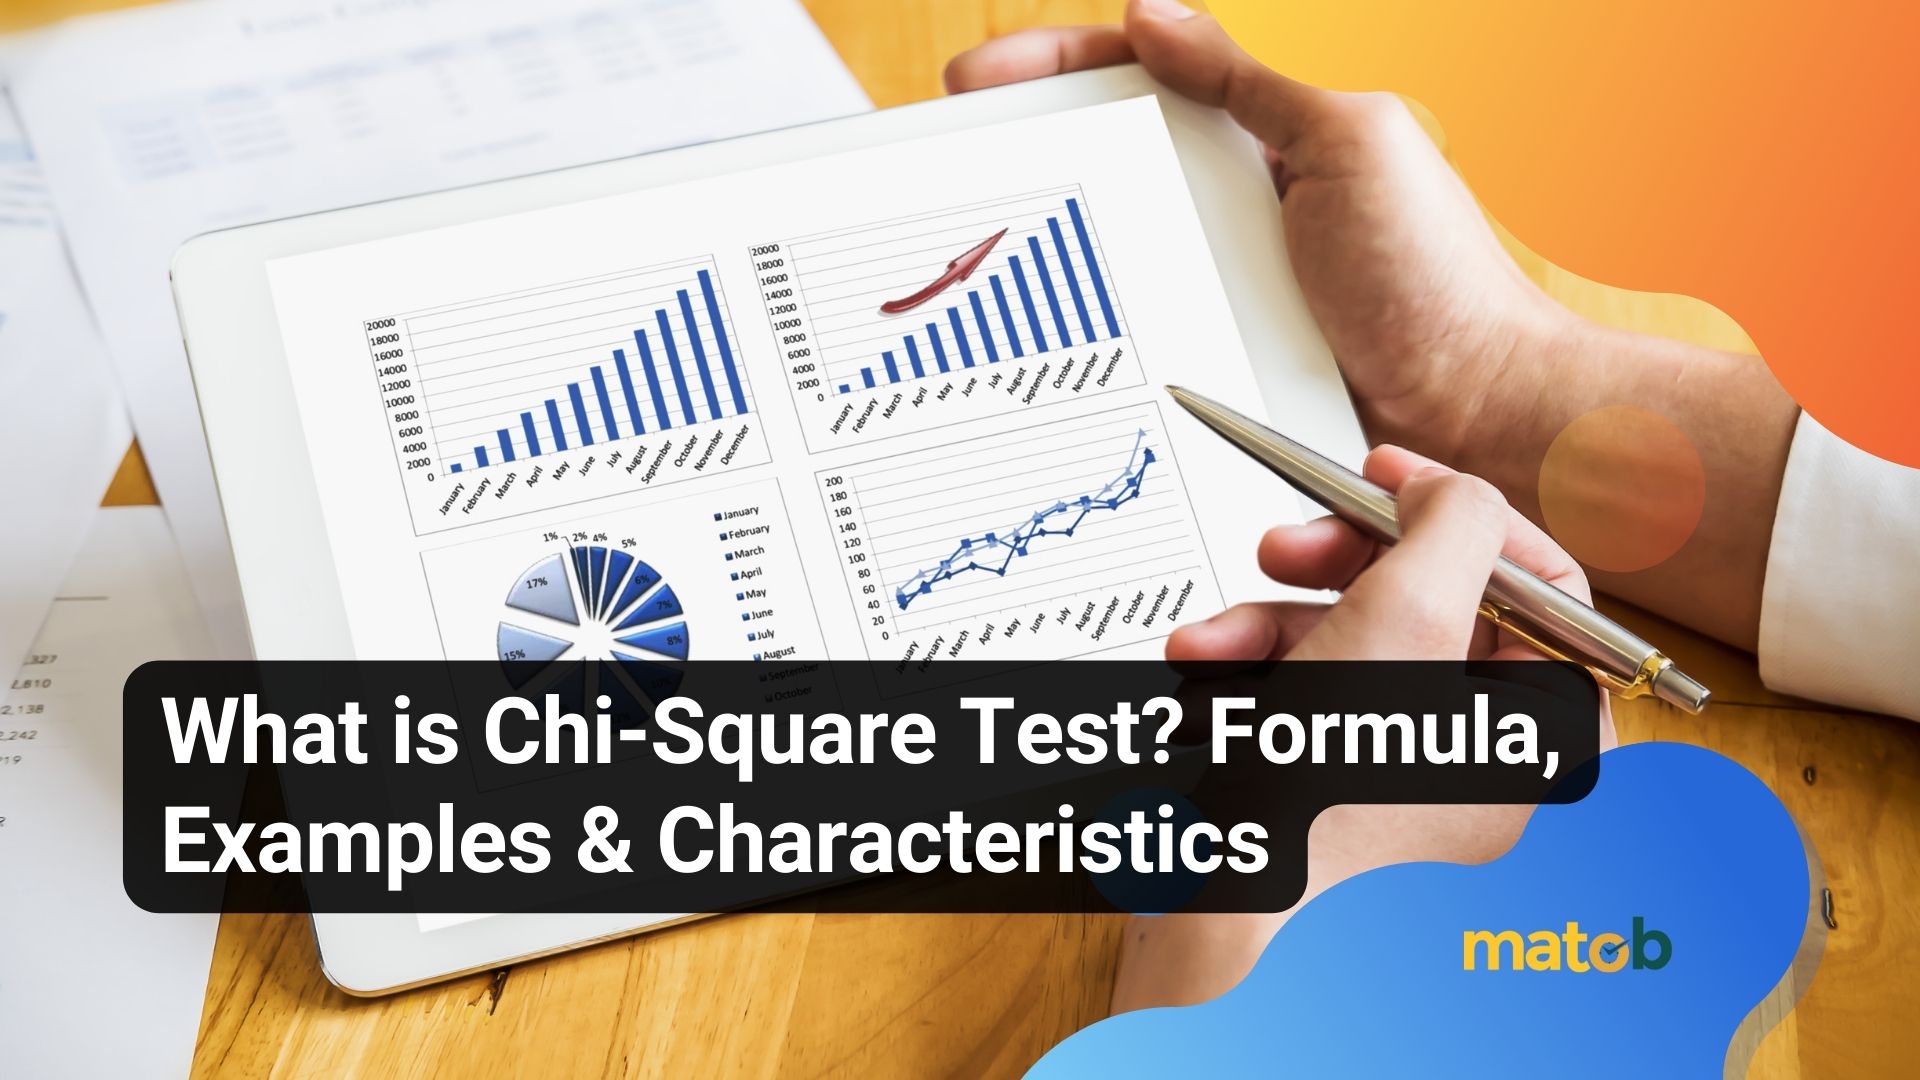 What is Chi-Square Test? Formula, Examples & Characteristics